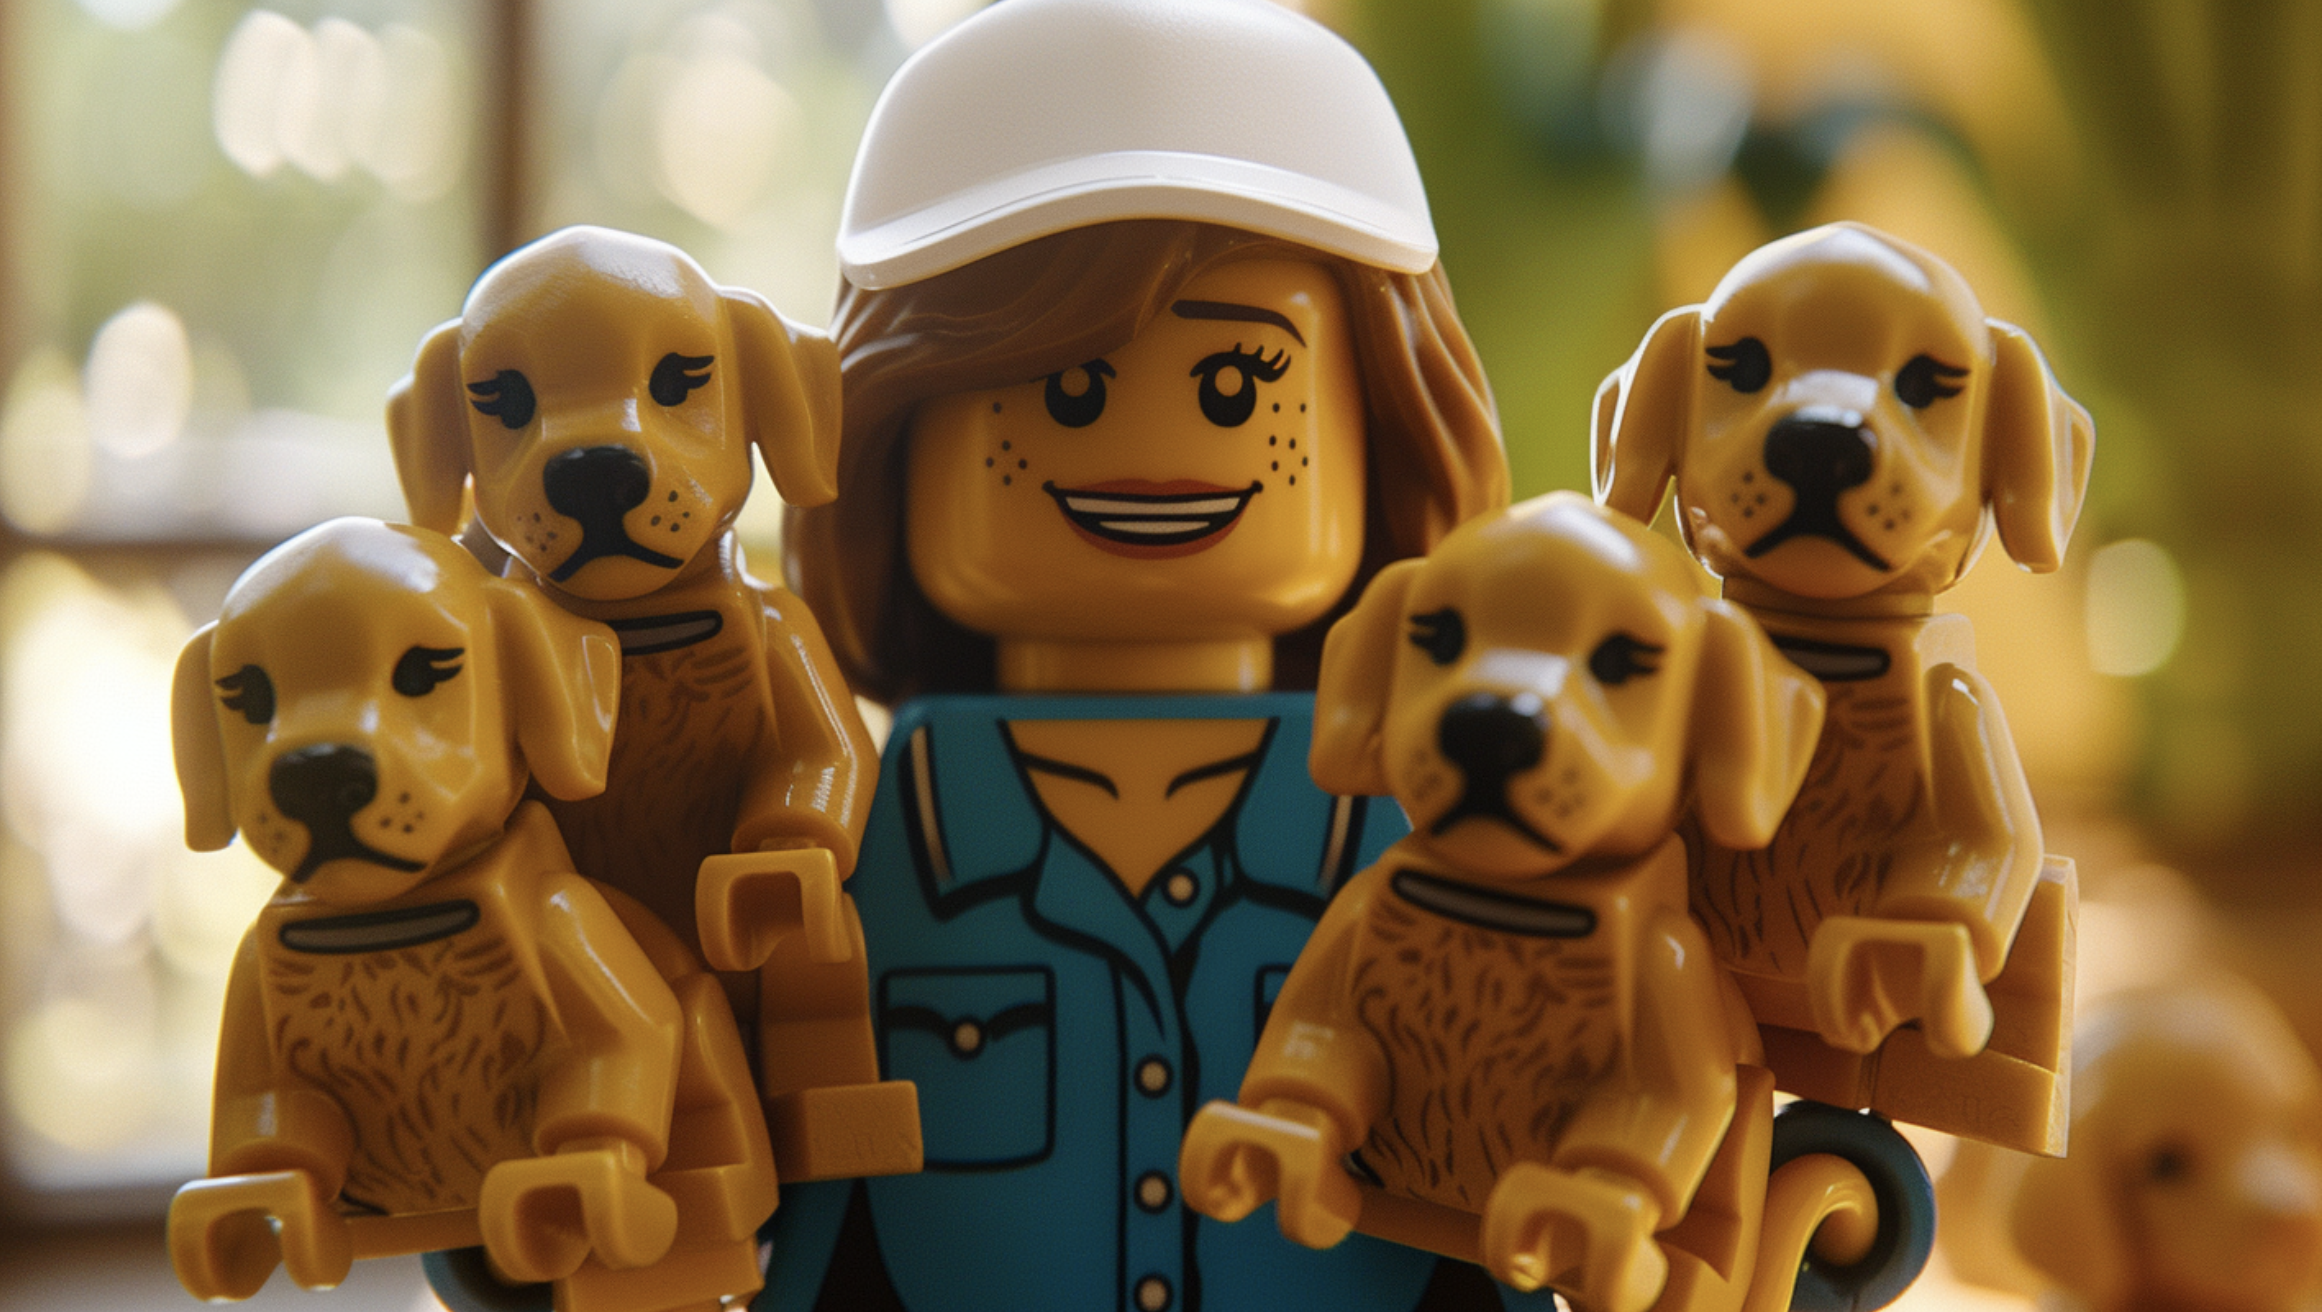 LEGO figure resembling Melissa McCarthy surrounded by four LEGO puppies